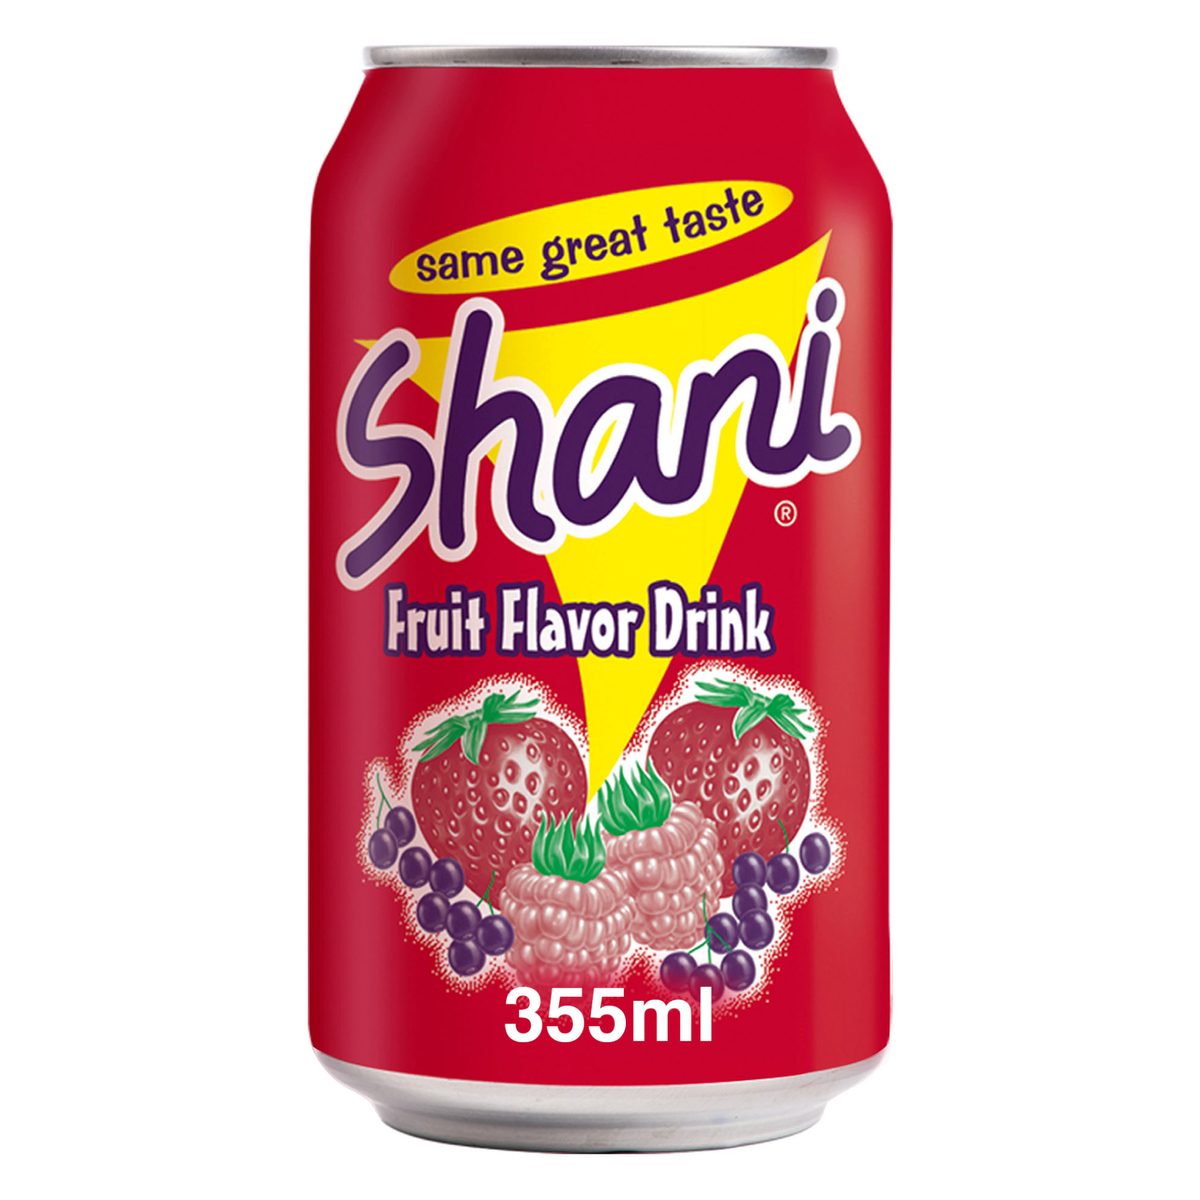 Shani Carbonated Soft Drink Cans 6 x 355 ml